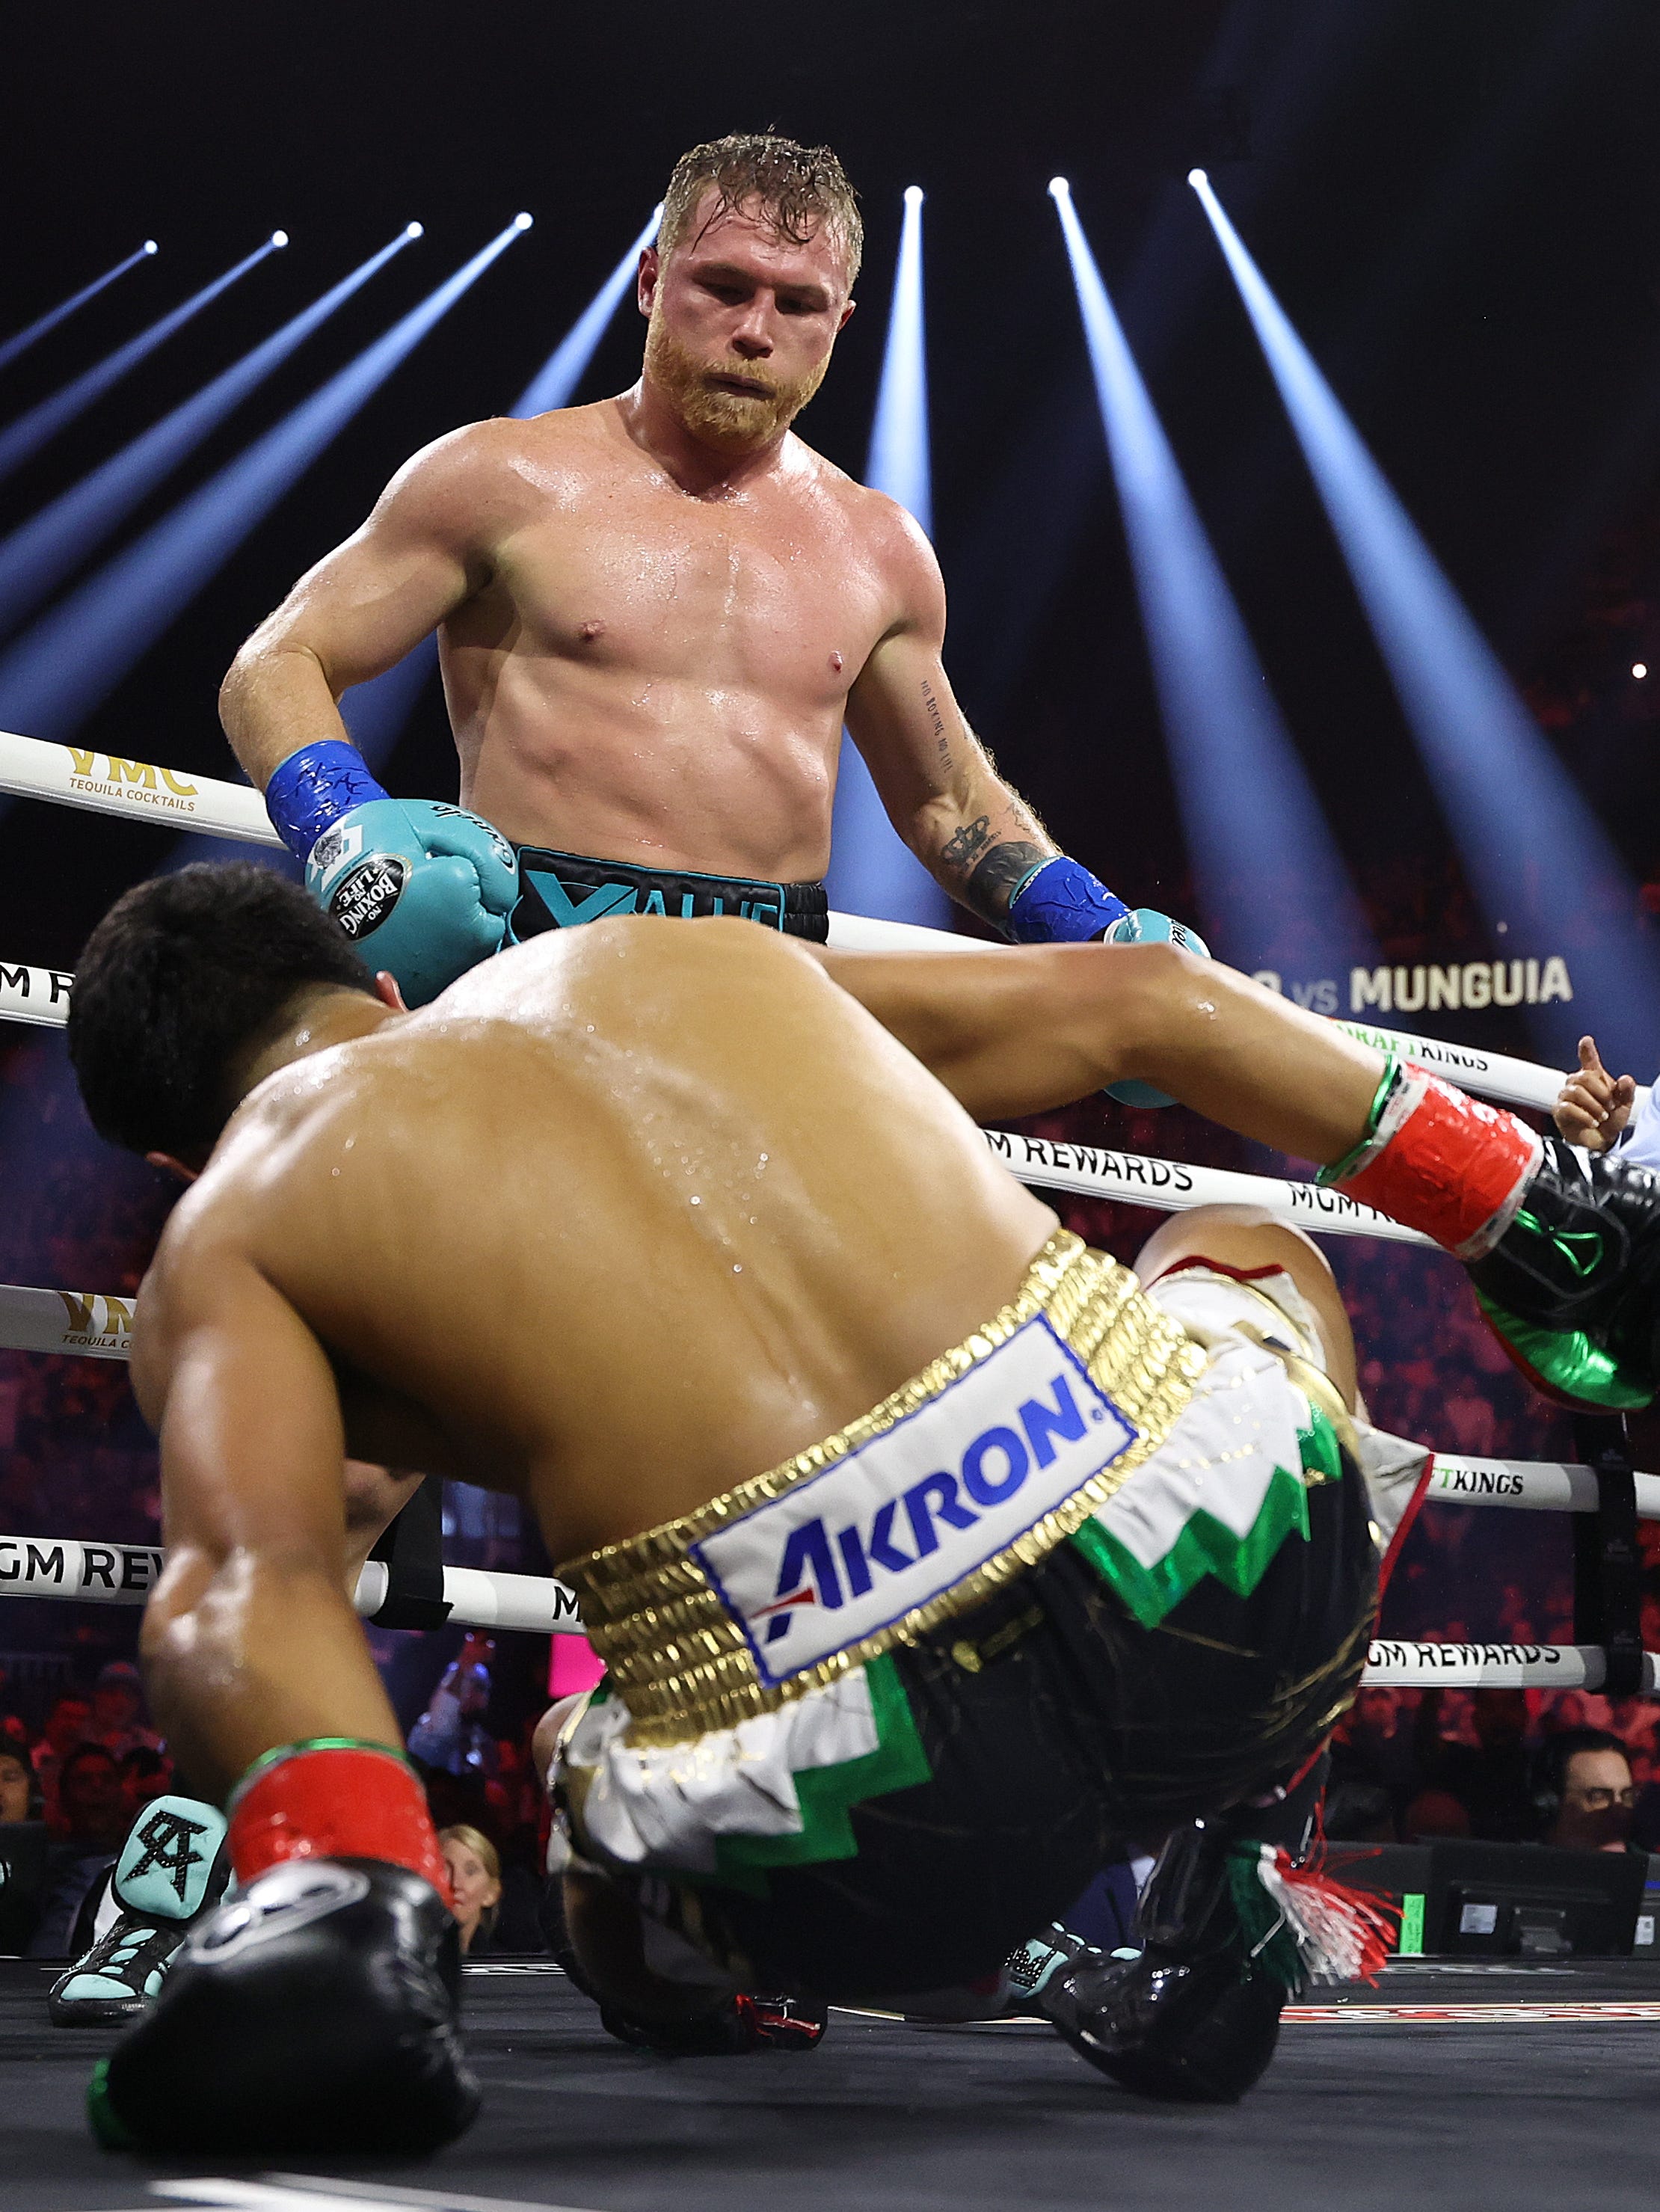 Canelo Álvarez defeats Jaime Munguía by unanimous decision: Round-by-round analysis - Detailed breakdown of Round 2 and each fighter's performance